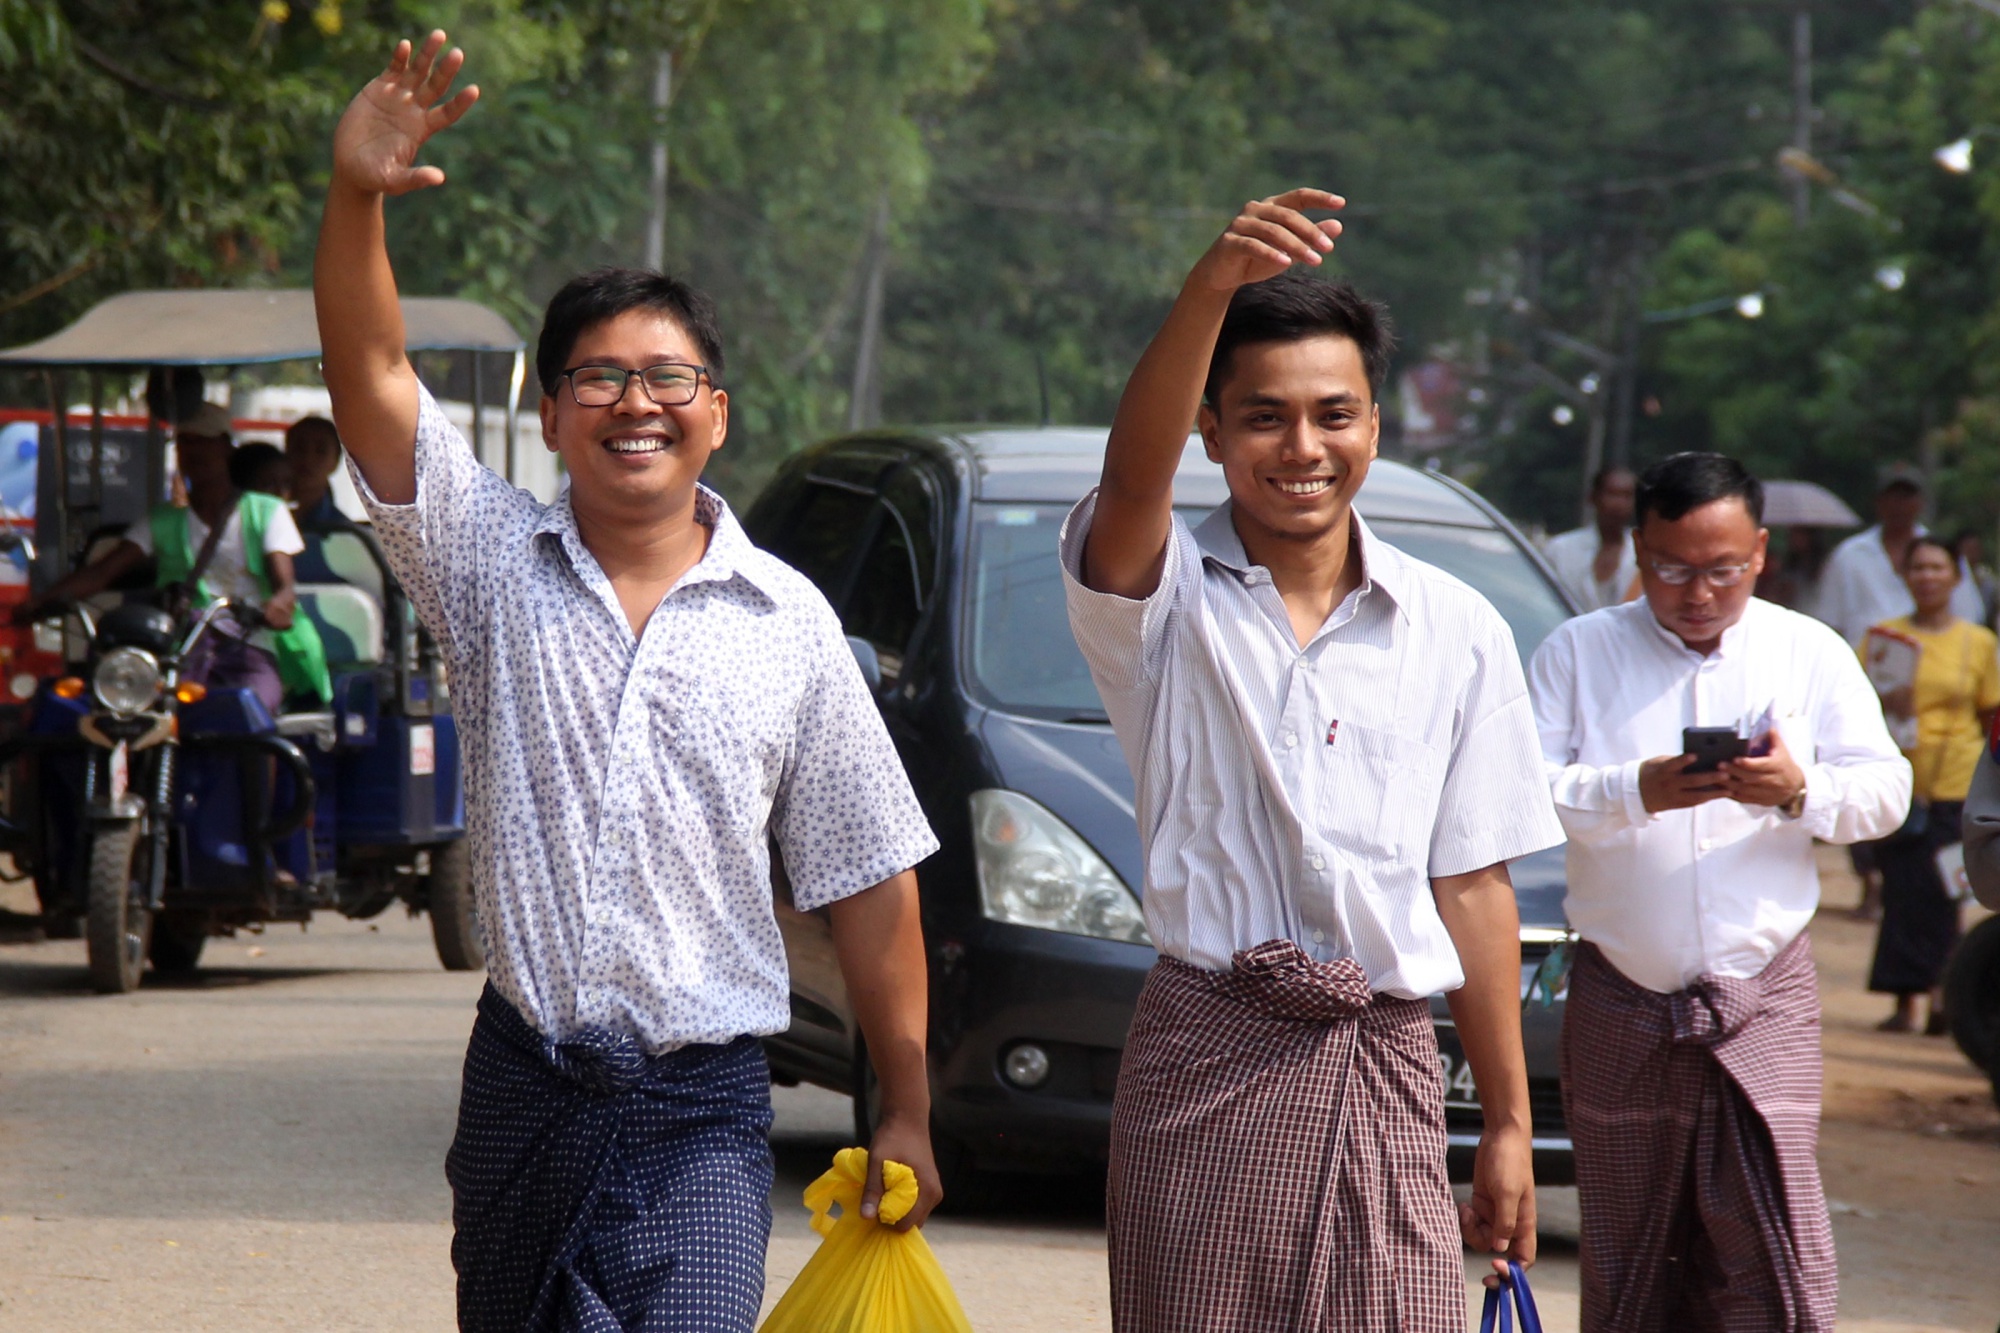 Reuters journalists’ release in Myanmar does not indicate an improving state of press freedom